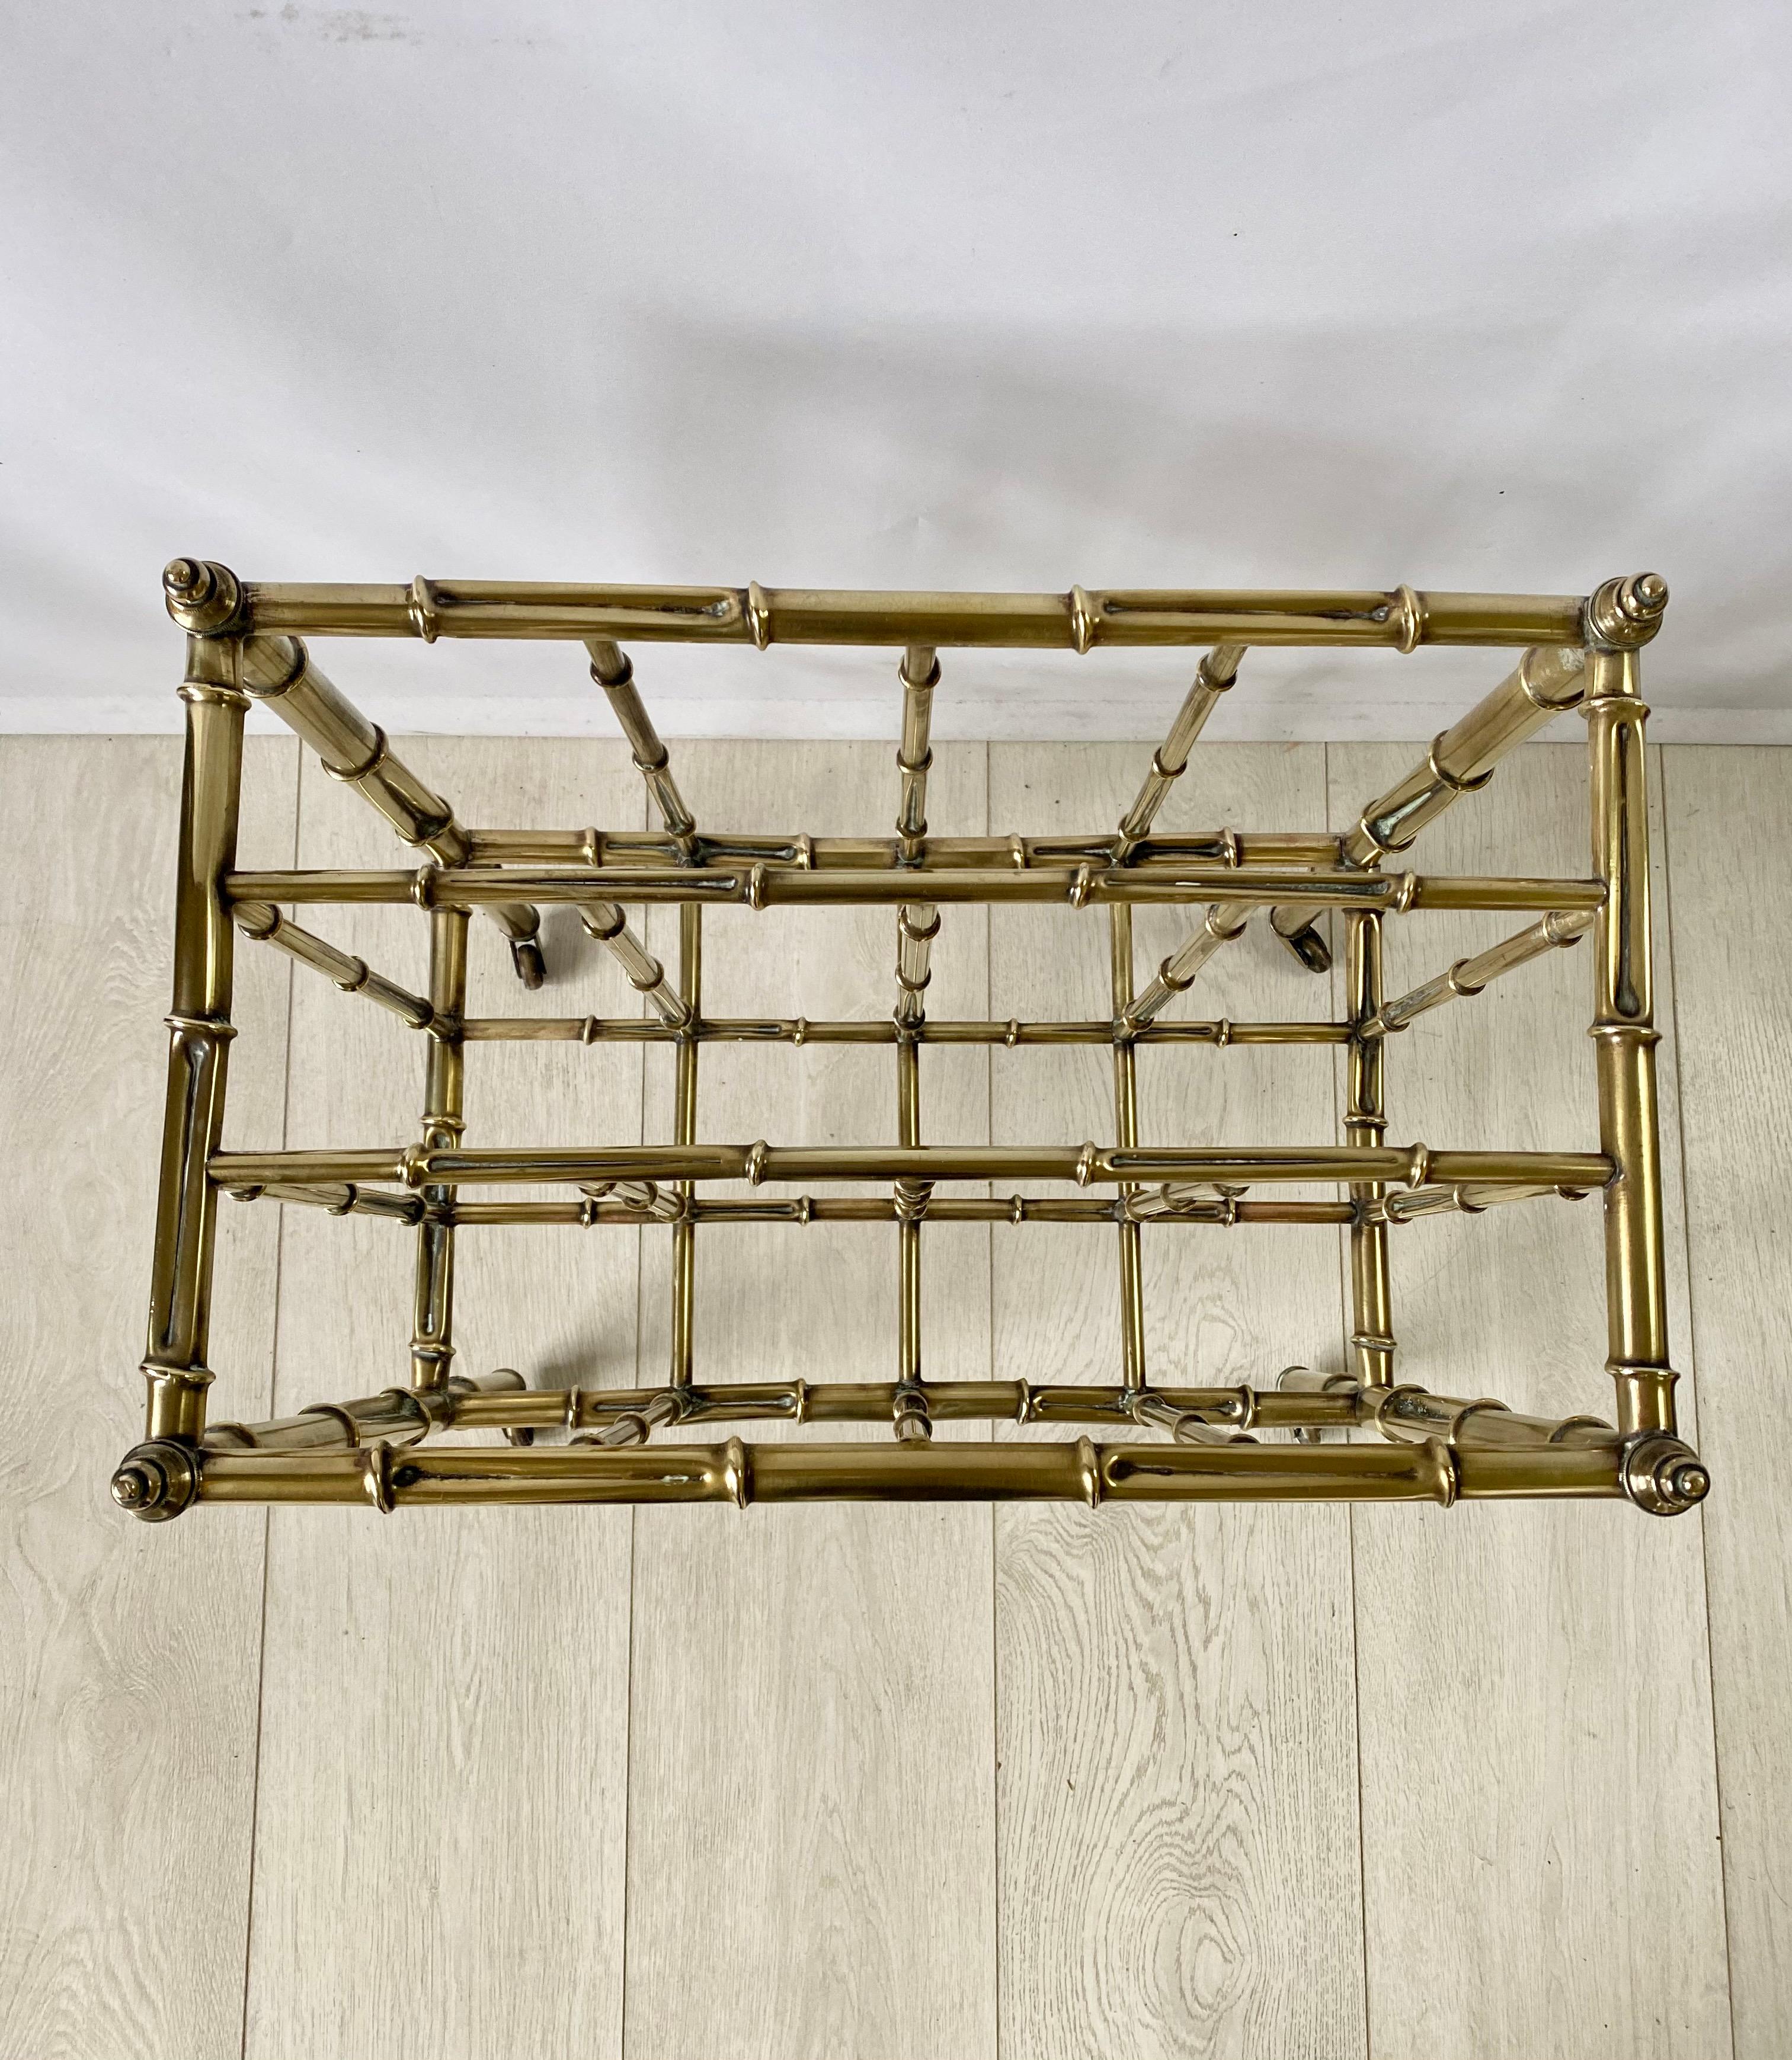 Vintage brass faux bamboo Canterbury or magazine rack

With 3 divisions on castors, 

Polished brass frame

Measures: 45 cm wide, 28 cm deep and 51cm tall.